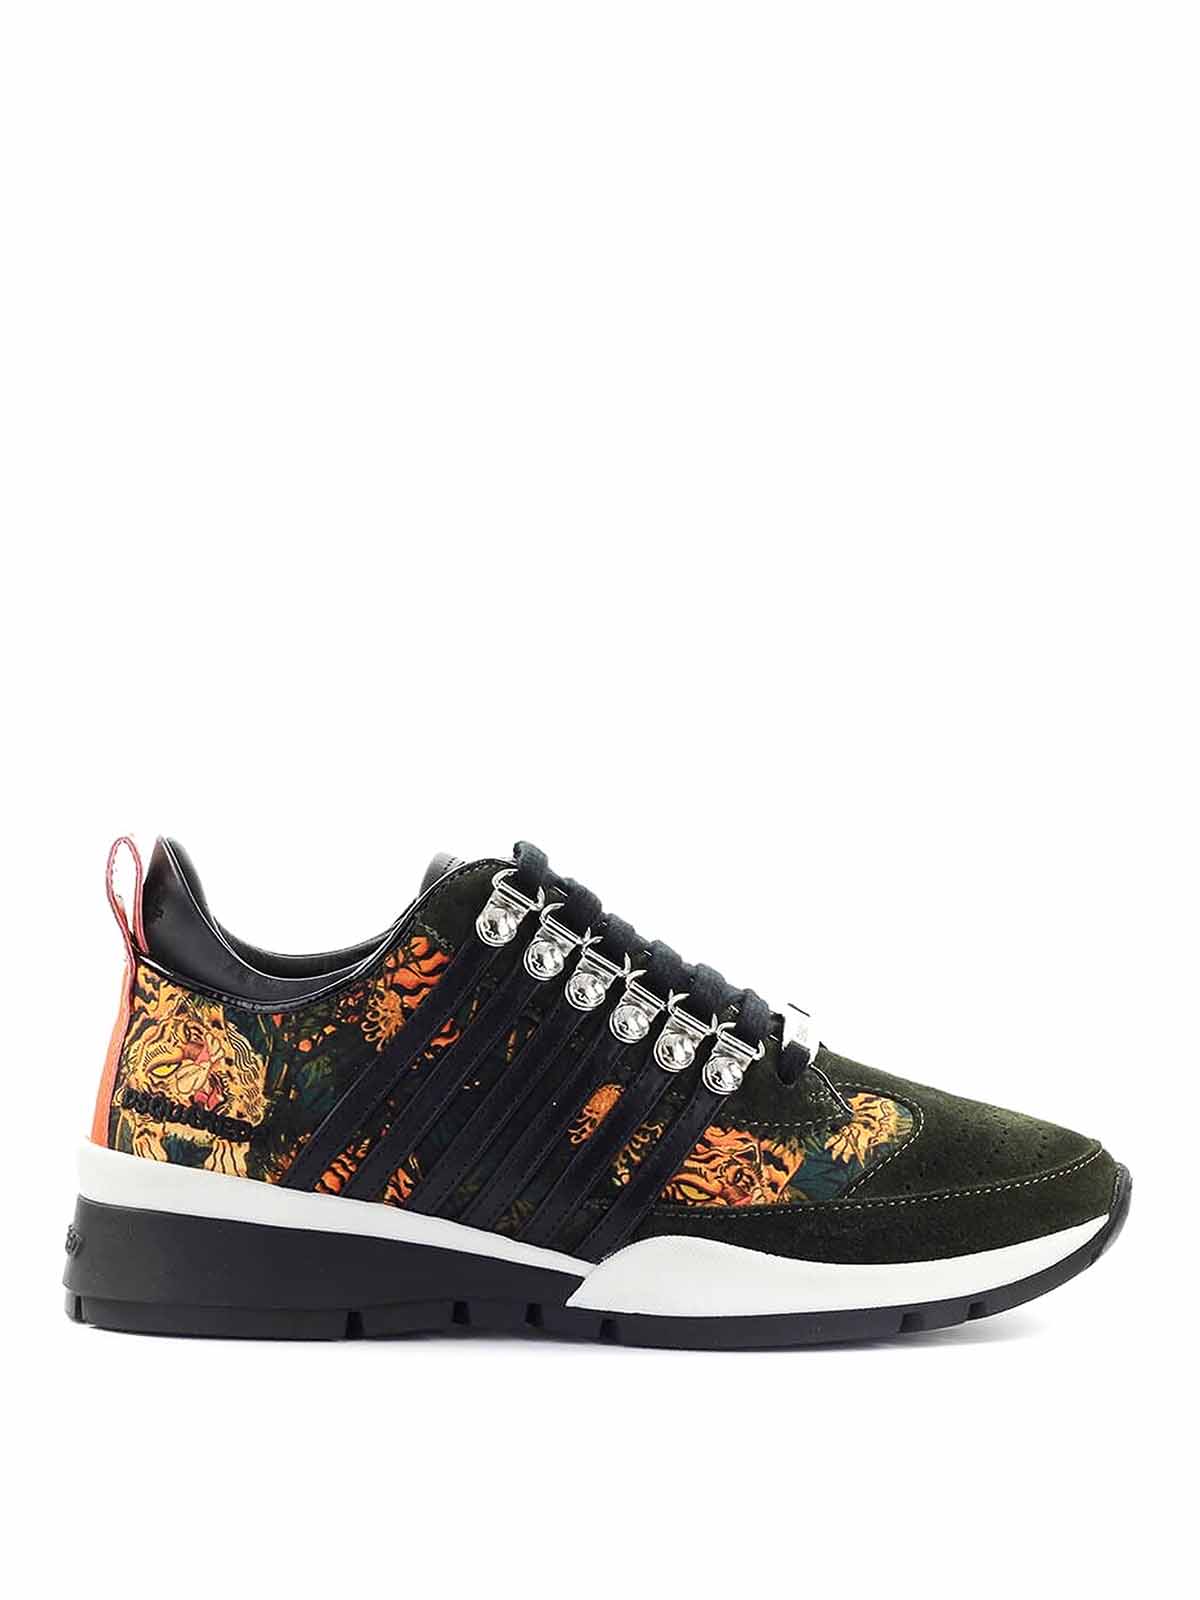 DSQUARED2 251 TIGER PRINT SNEAKERS